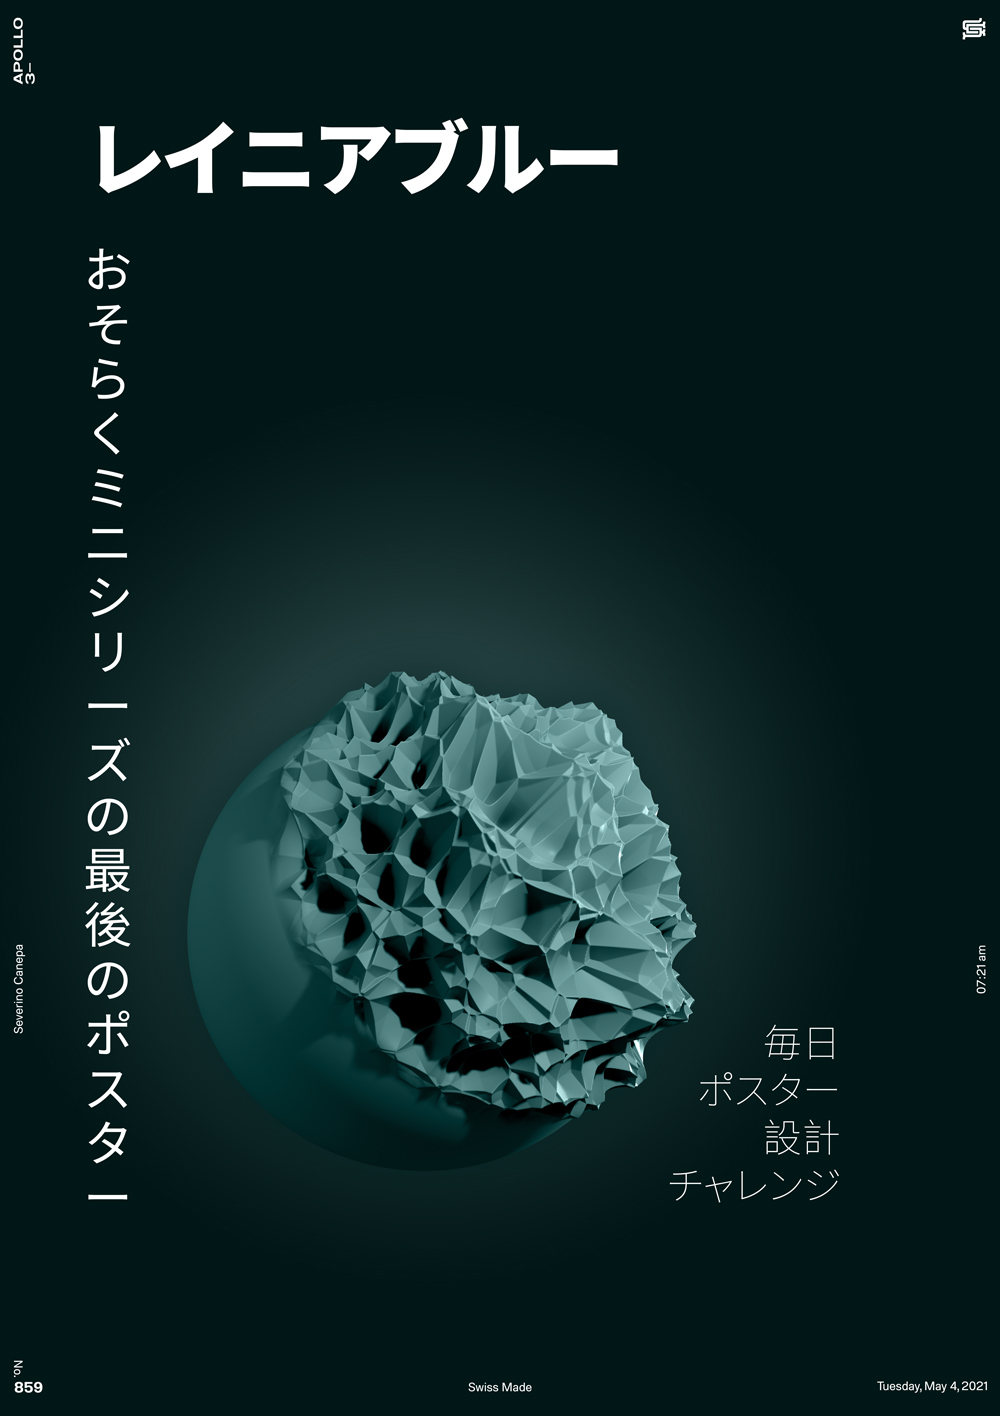 Graphic creation where I compose with Japanese typography and a 3D sphere